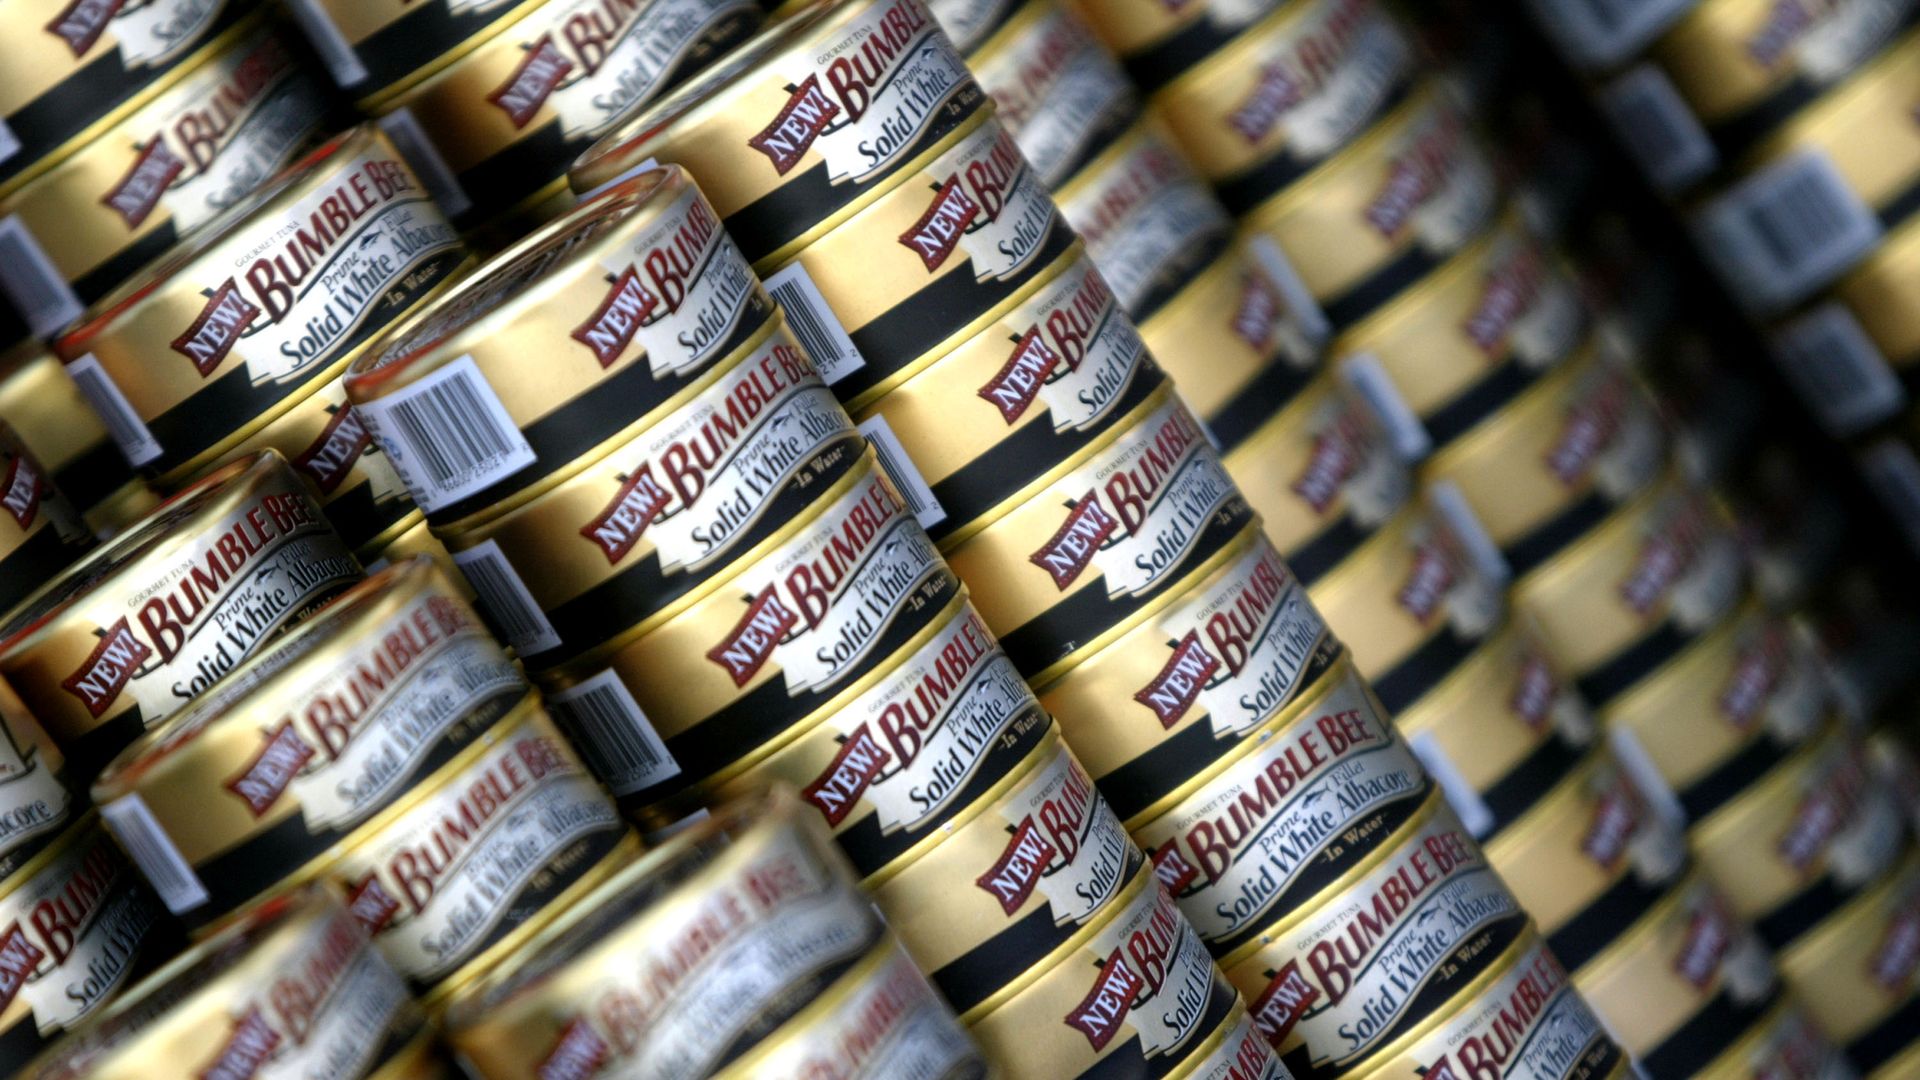 Cans of Bumble Bee tuna